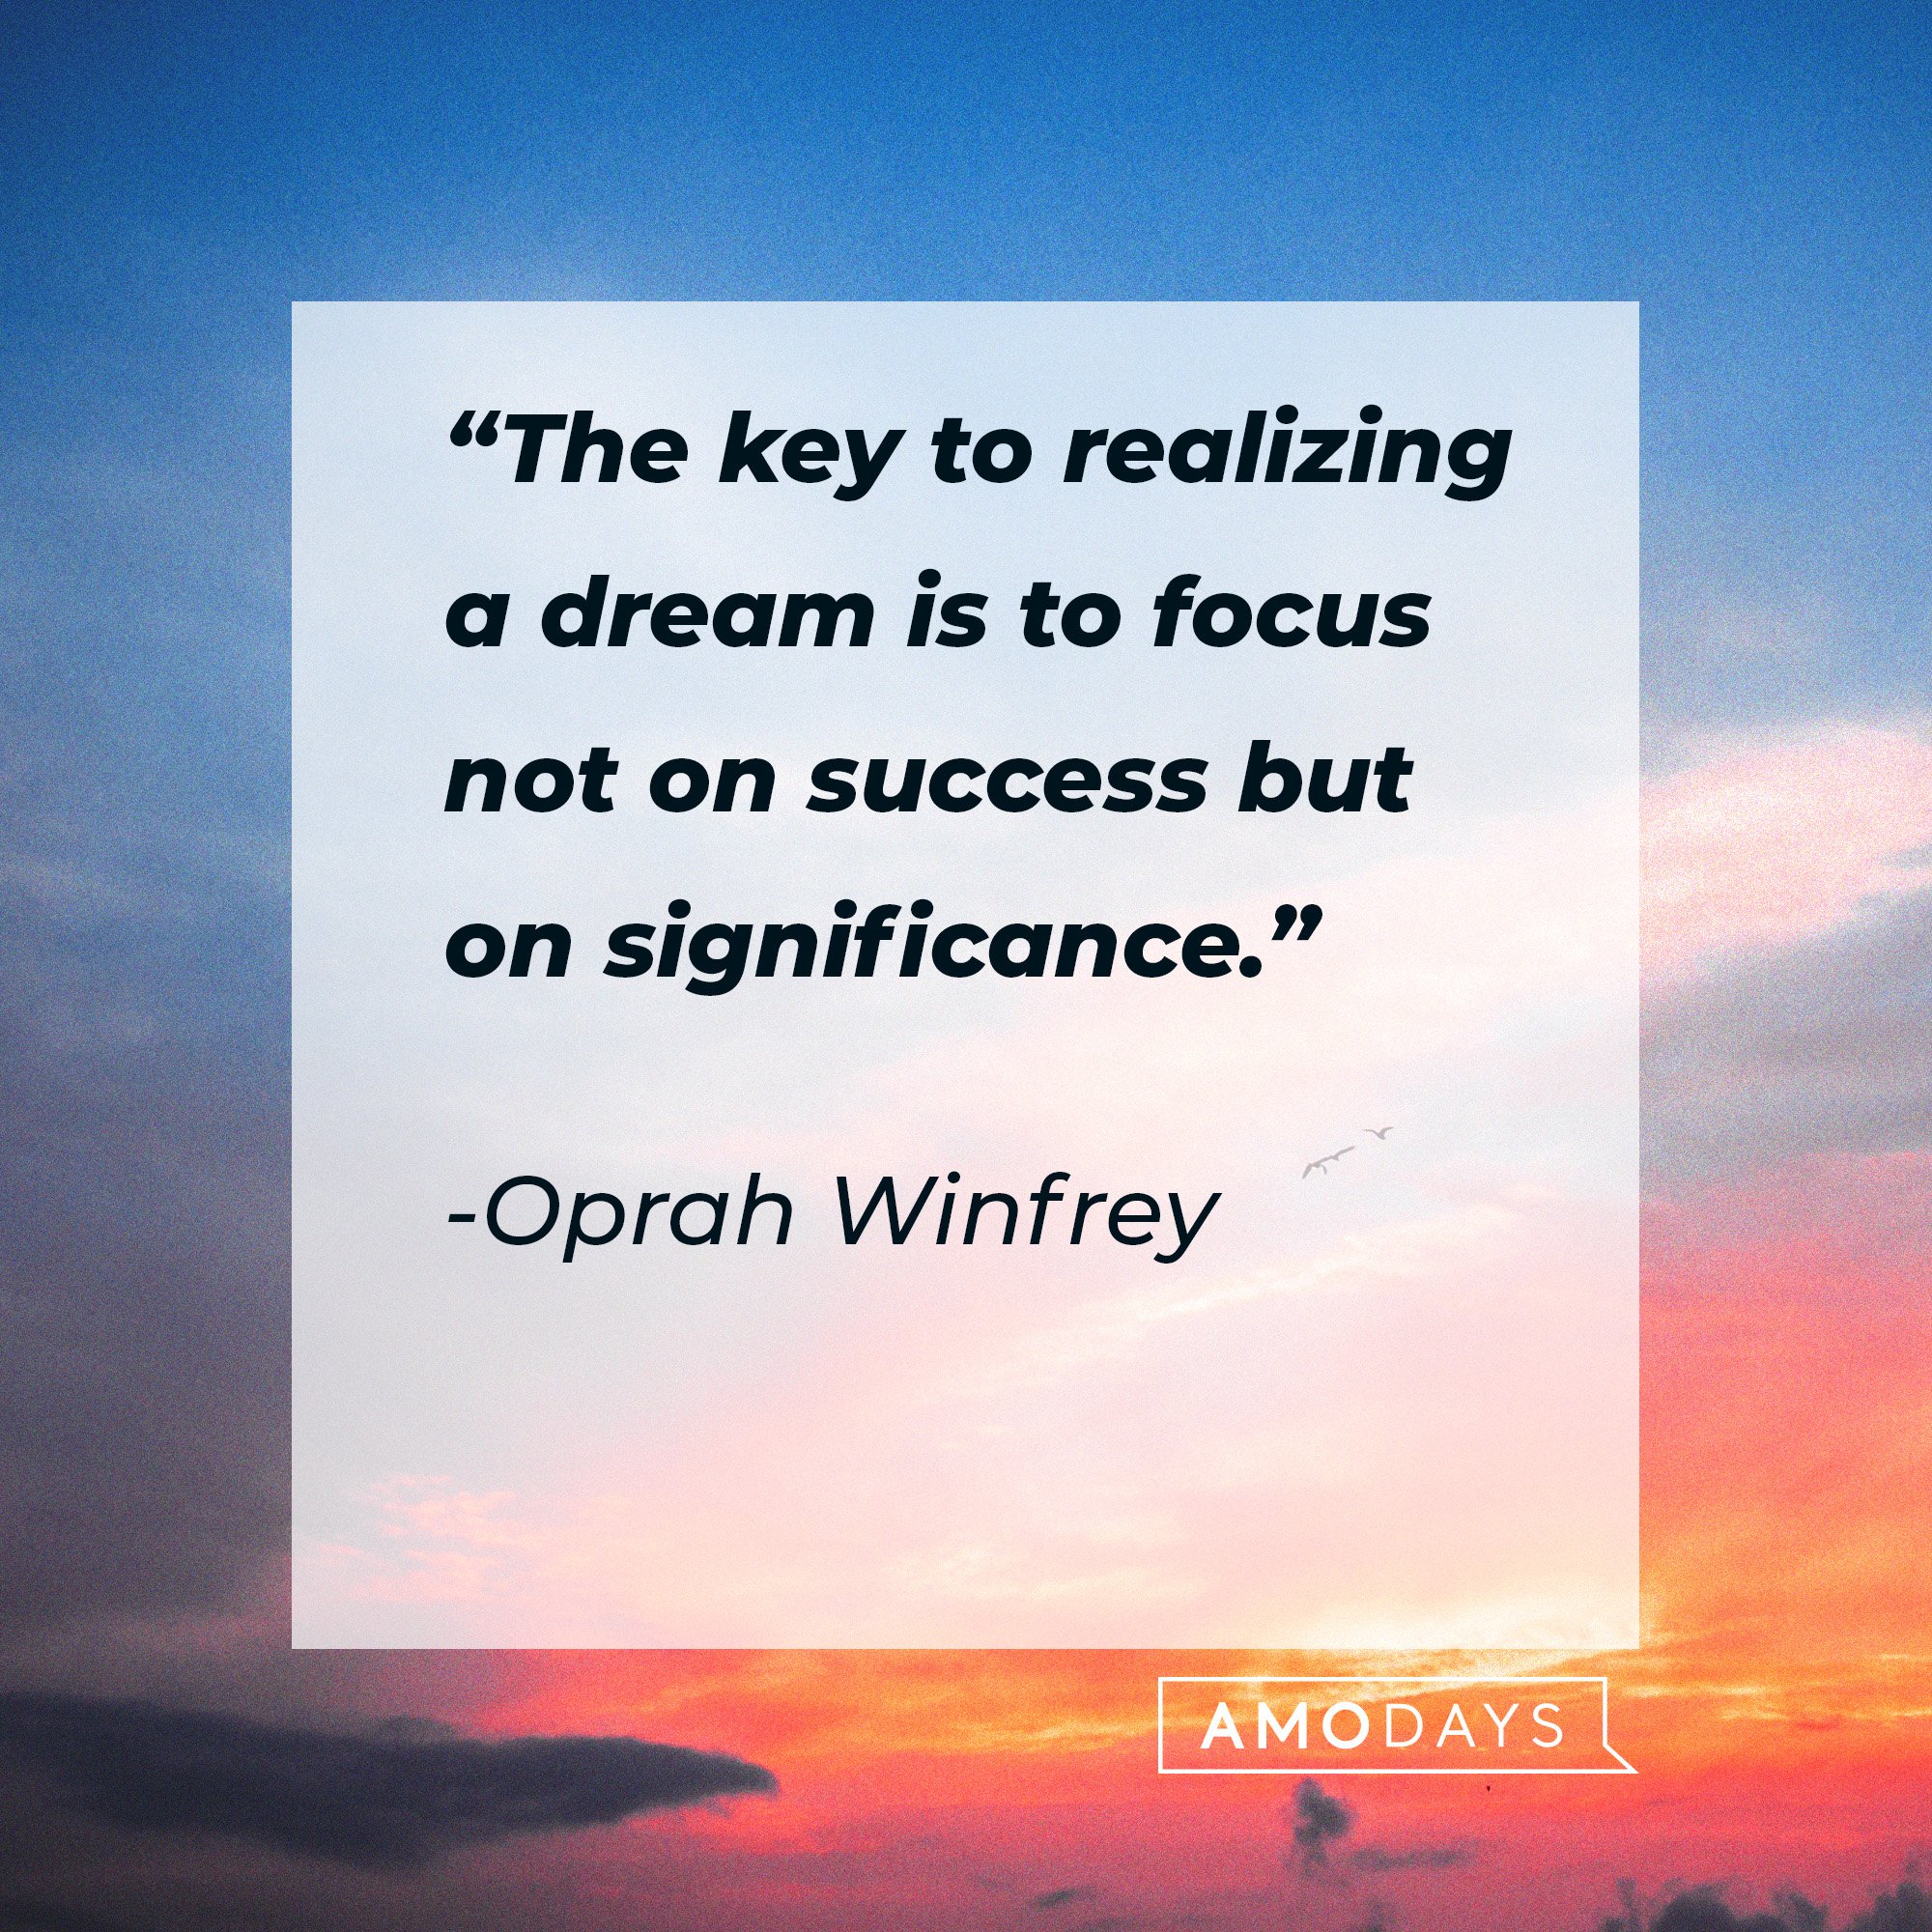 Oprah Winfrey's quote: “The key to realizing a dream is to focus not on success but on significance.” | Image: AmoDays